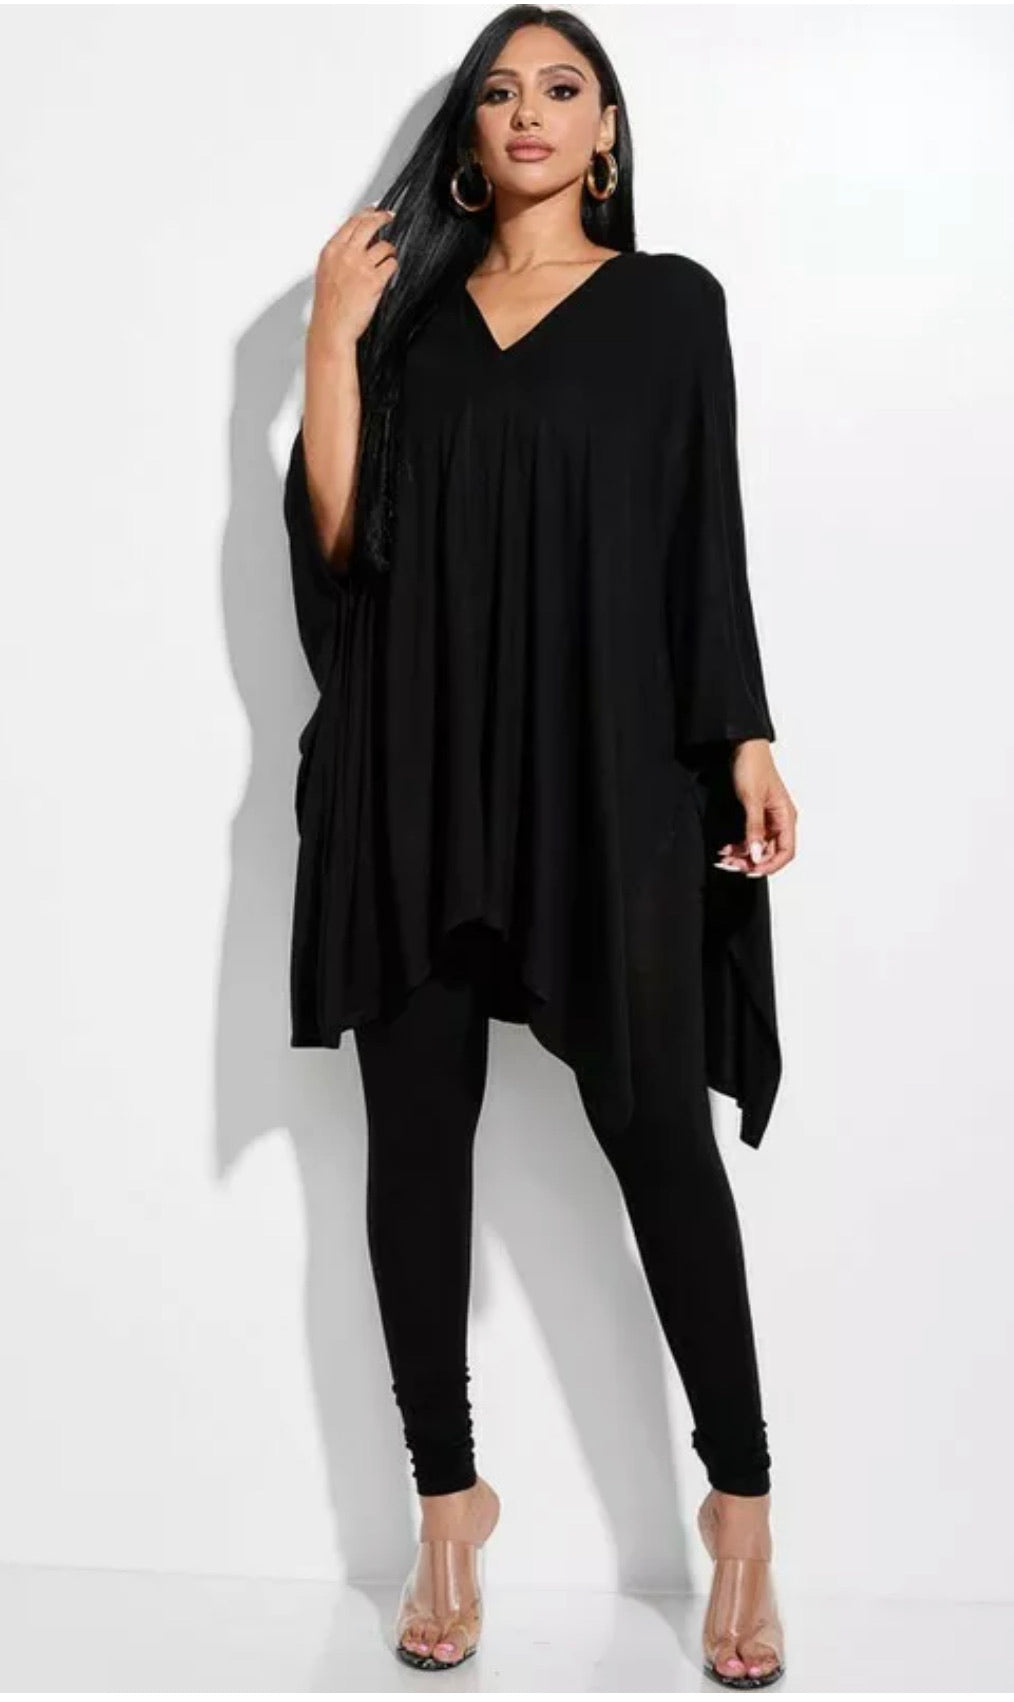 Black Solid Cape Top and Leggings Set